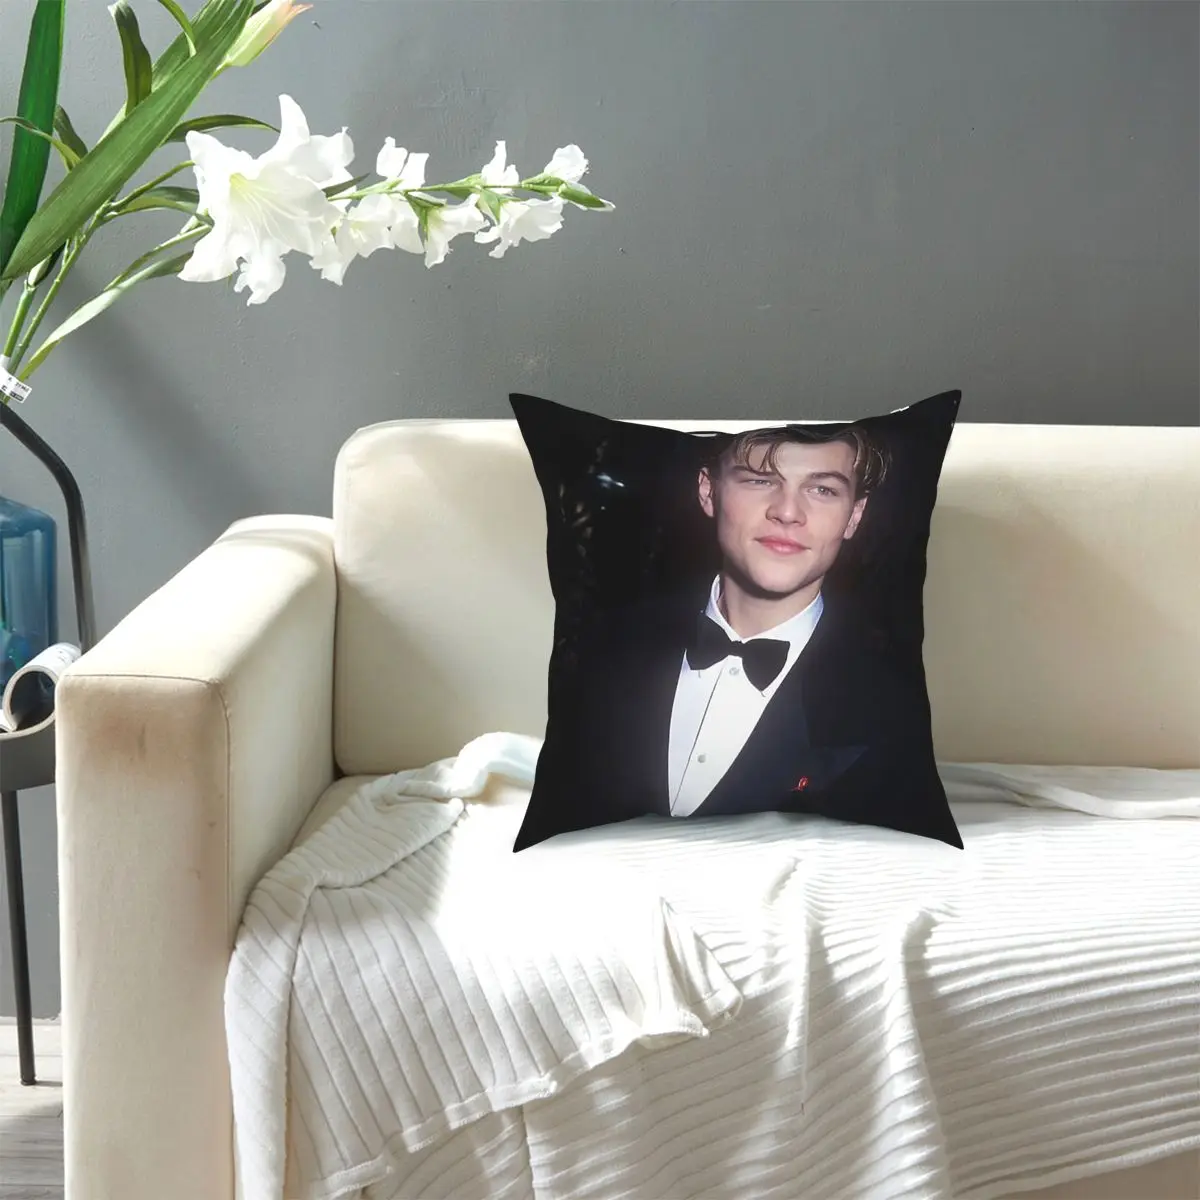 

Leonardo Dicaprio Young Throw Pillow Cover Cushions for Sofa Novelty Cushion Covers